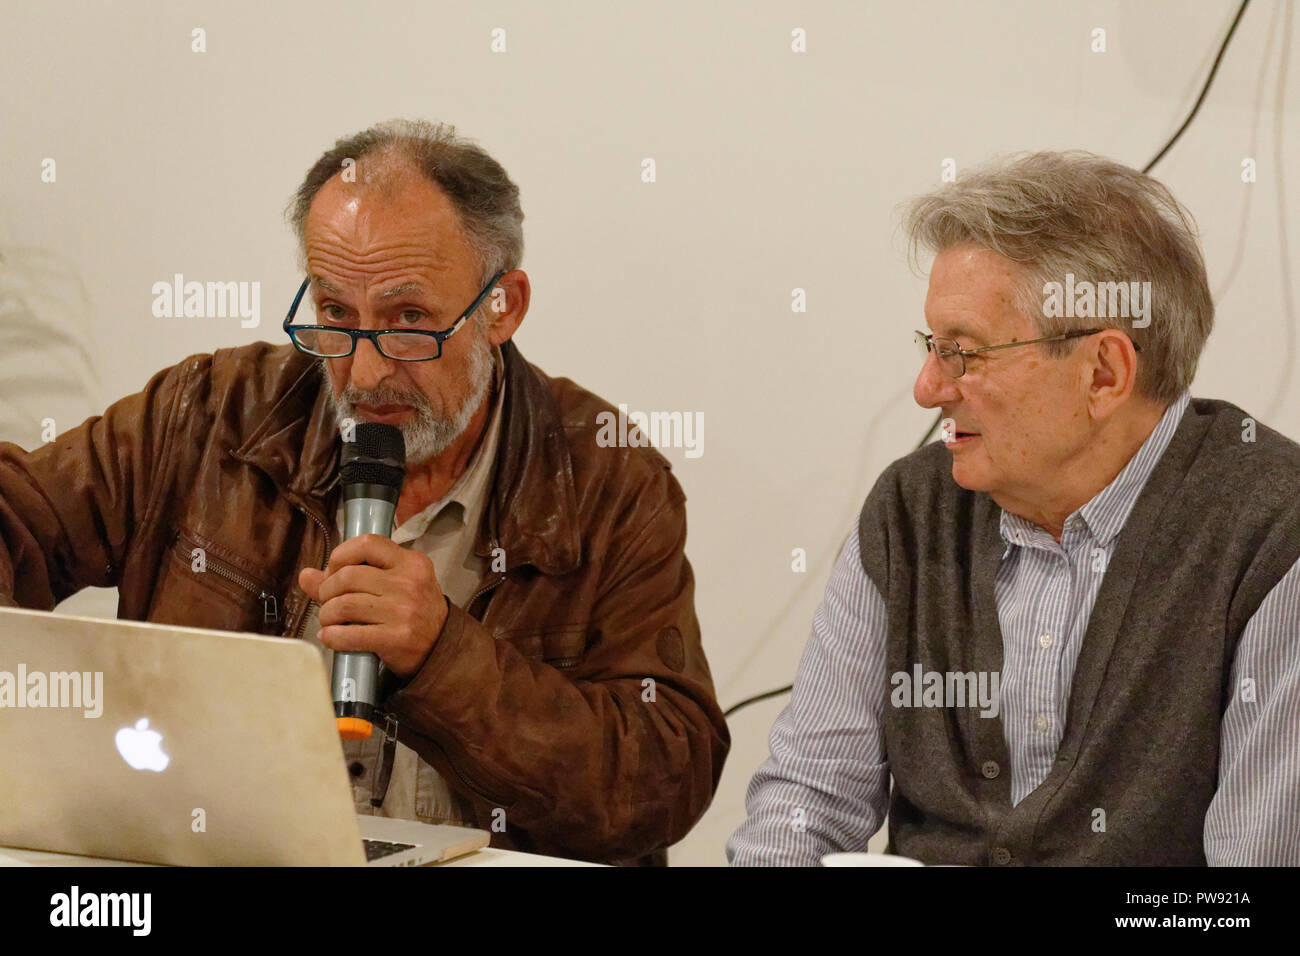 Turin, Italy. 13th October, 2018. Manoocher Deghati and Adriano Sofri give a public lecture at the World Press Photo 2018 exhibition. MLBARIONA/Alamy Live News Stock Photo